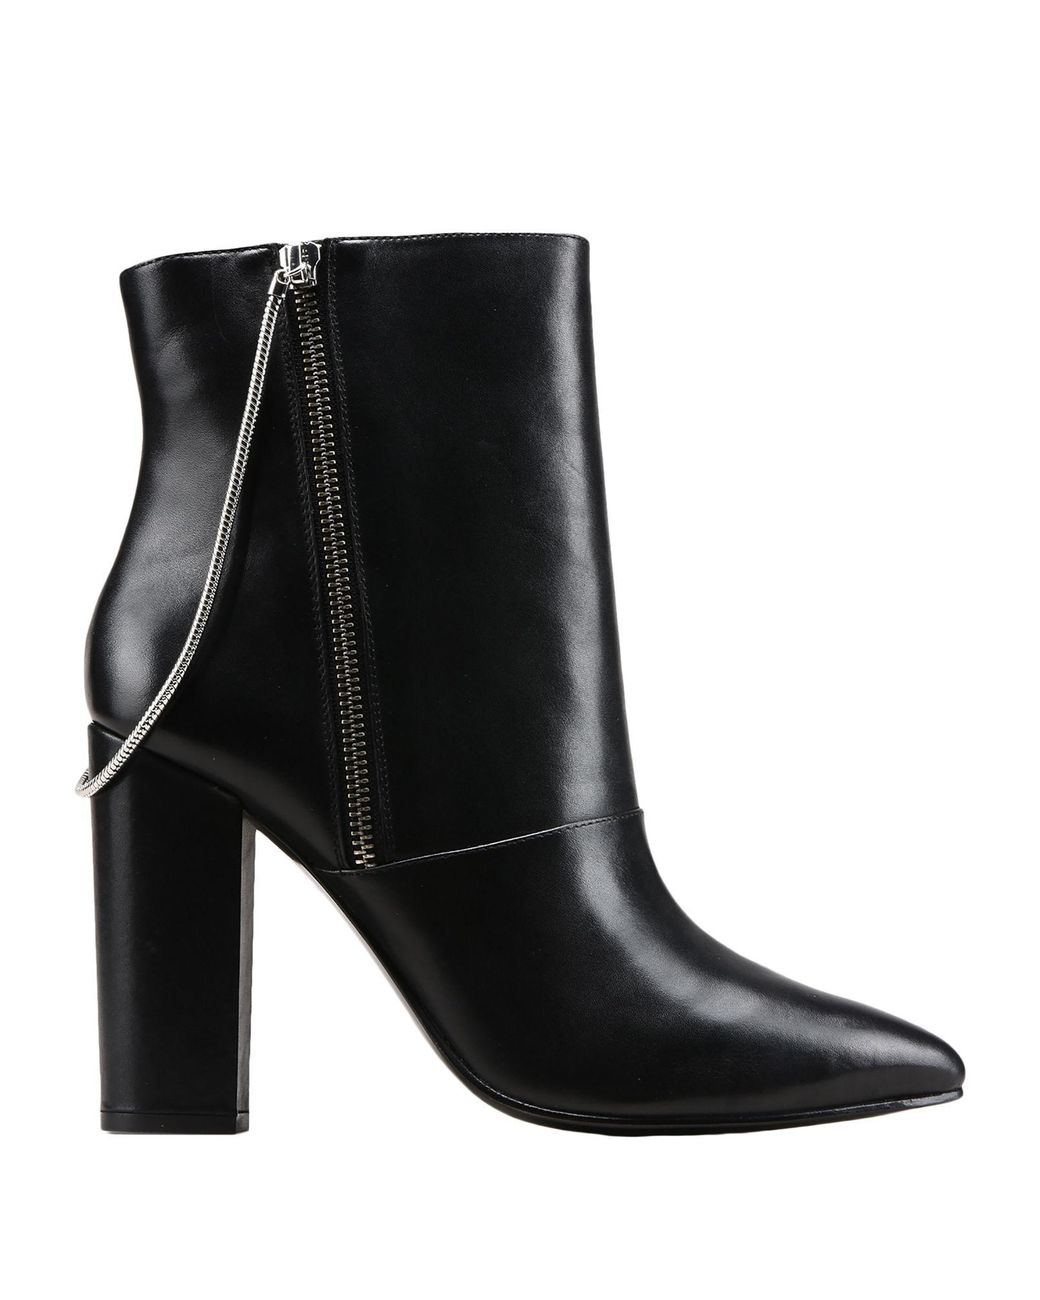 Emporio Armani Leather Ankle Boots in Black - Lyst